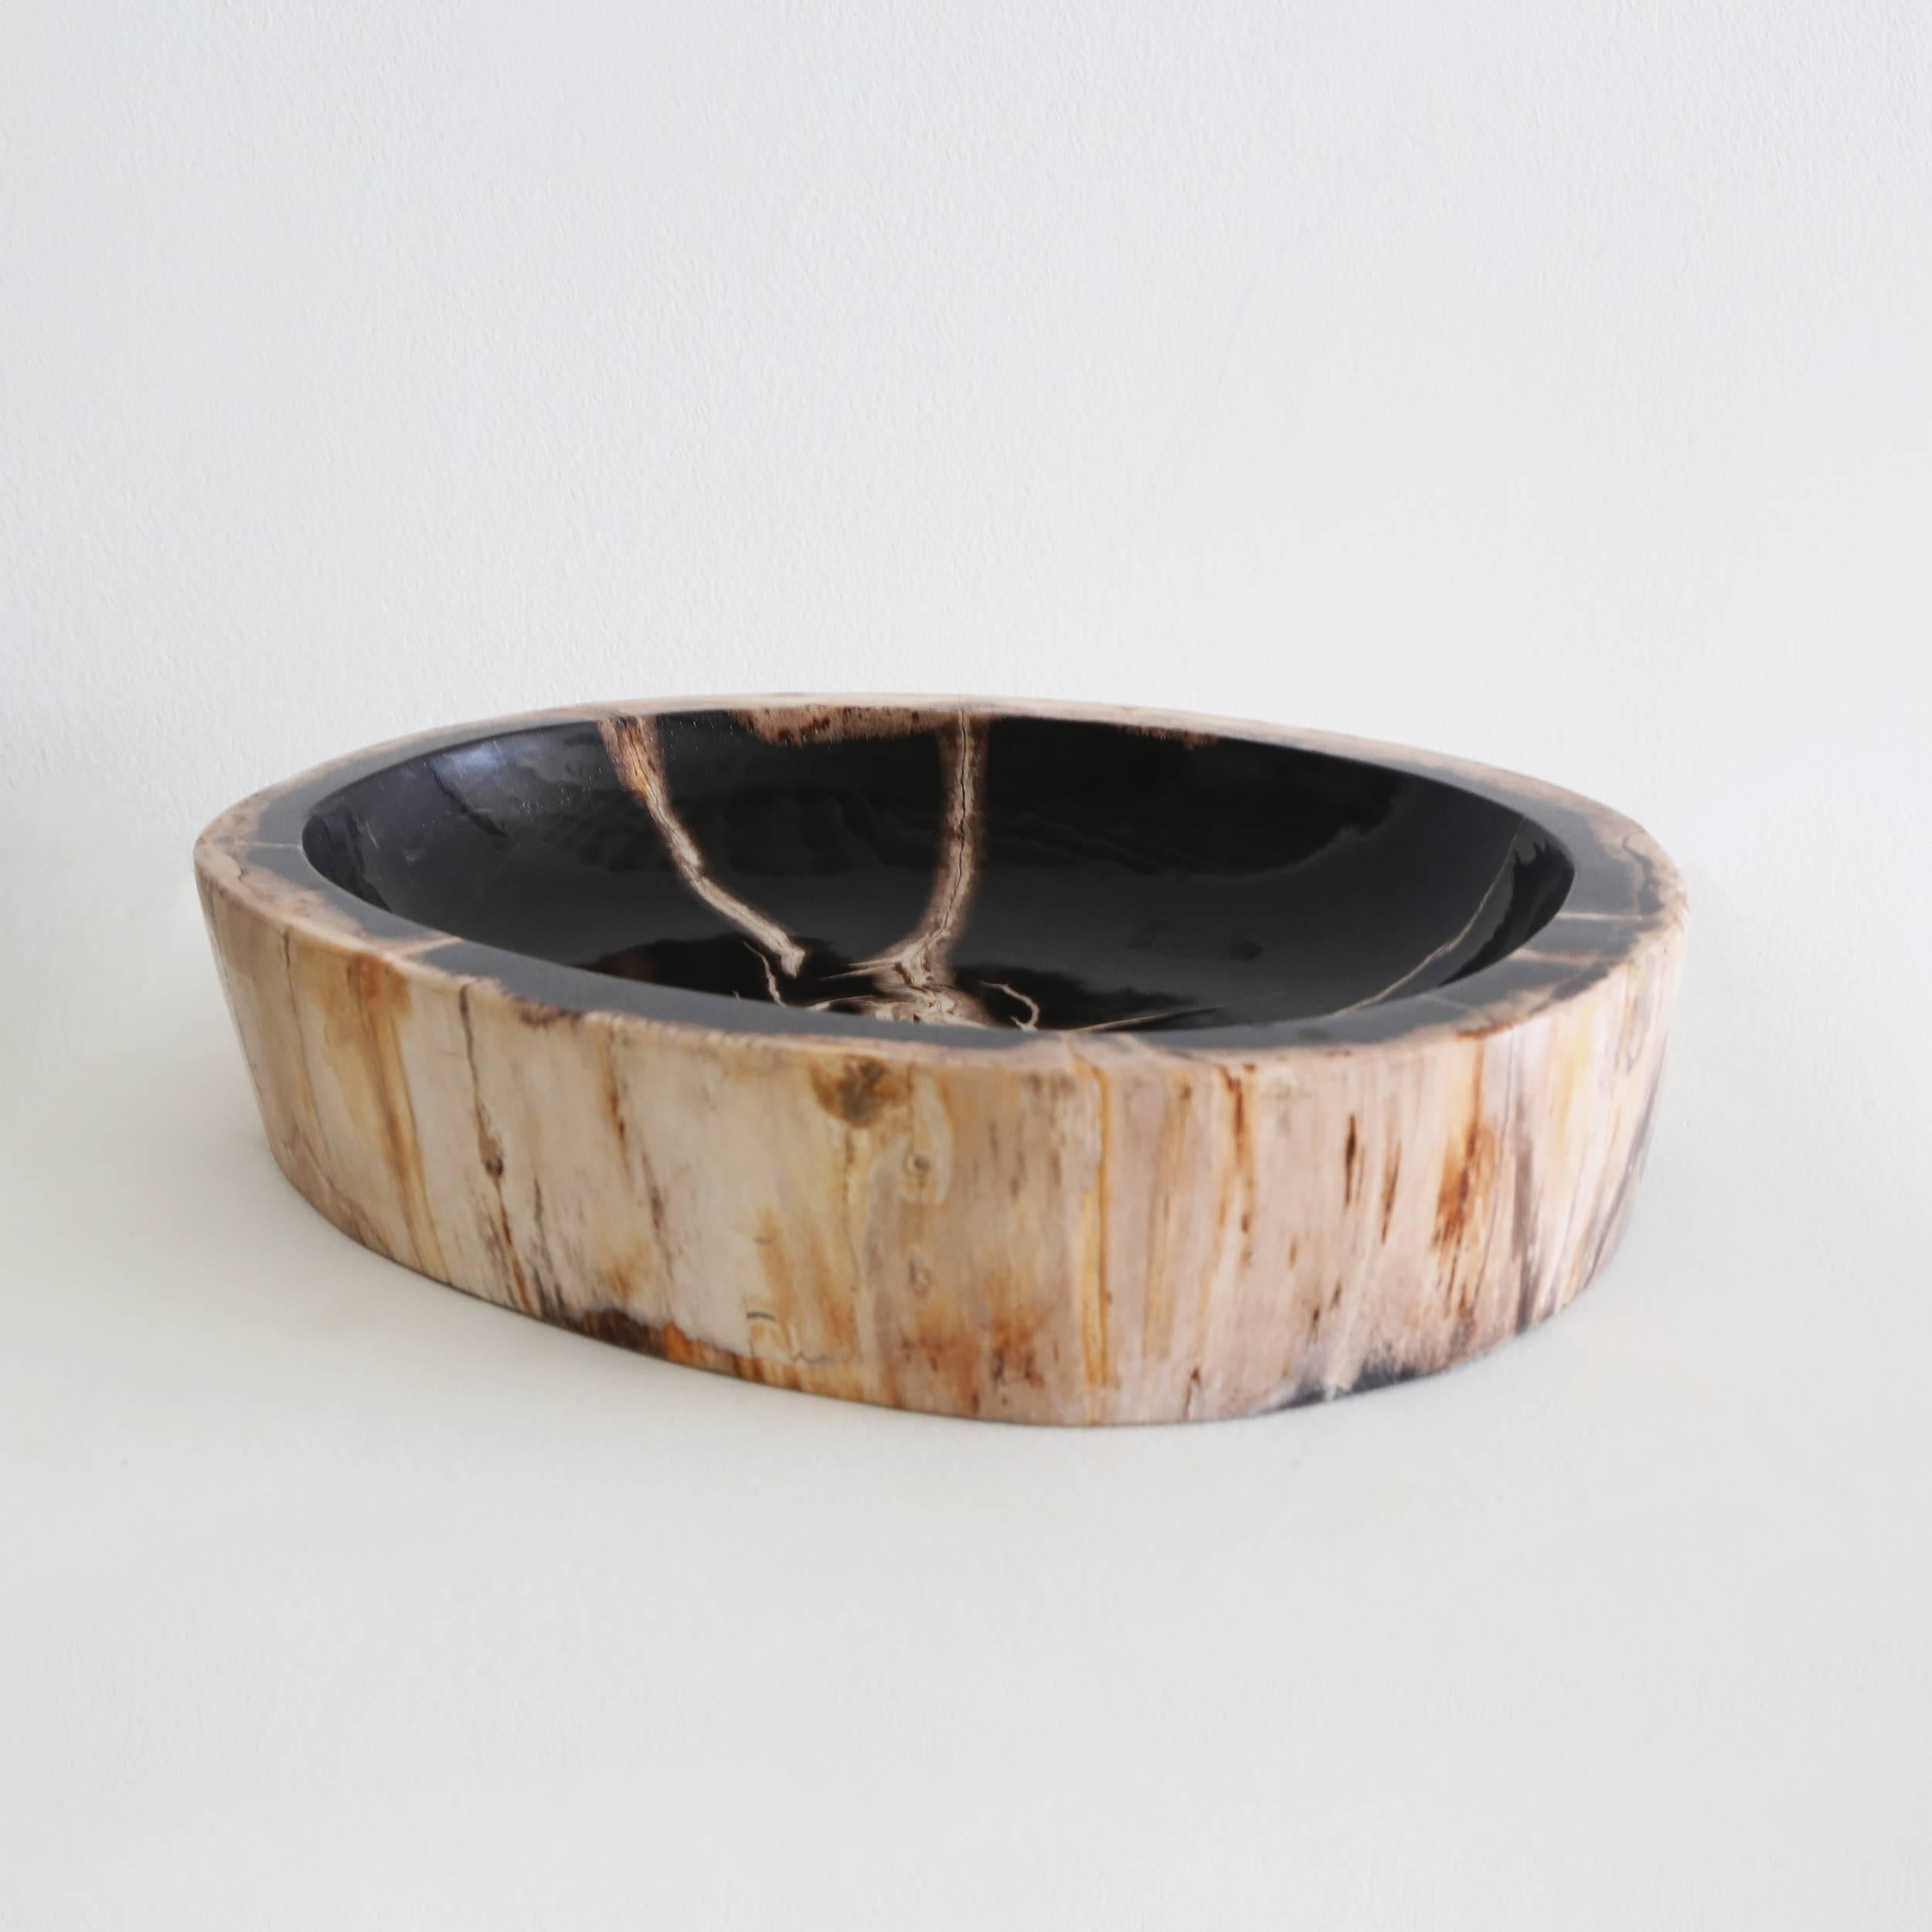 Petrified Wood Bowl - Contemporary Art by Unknown